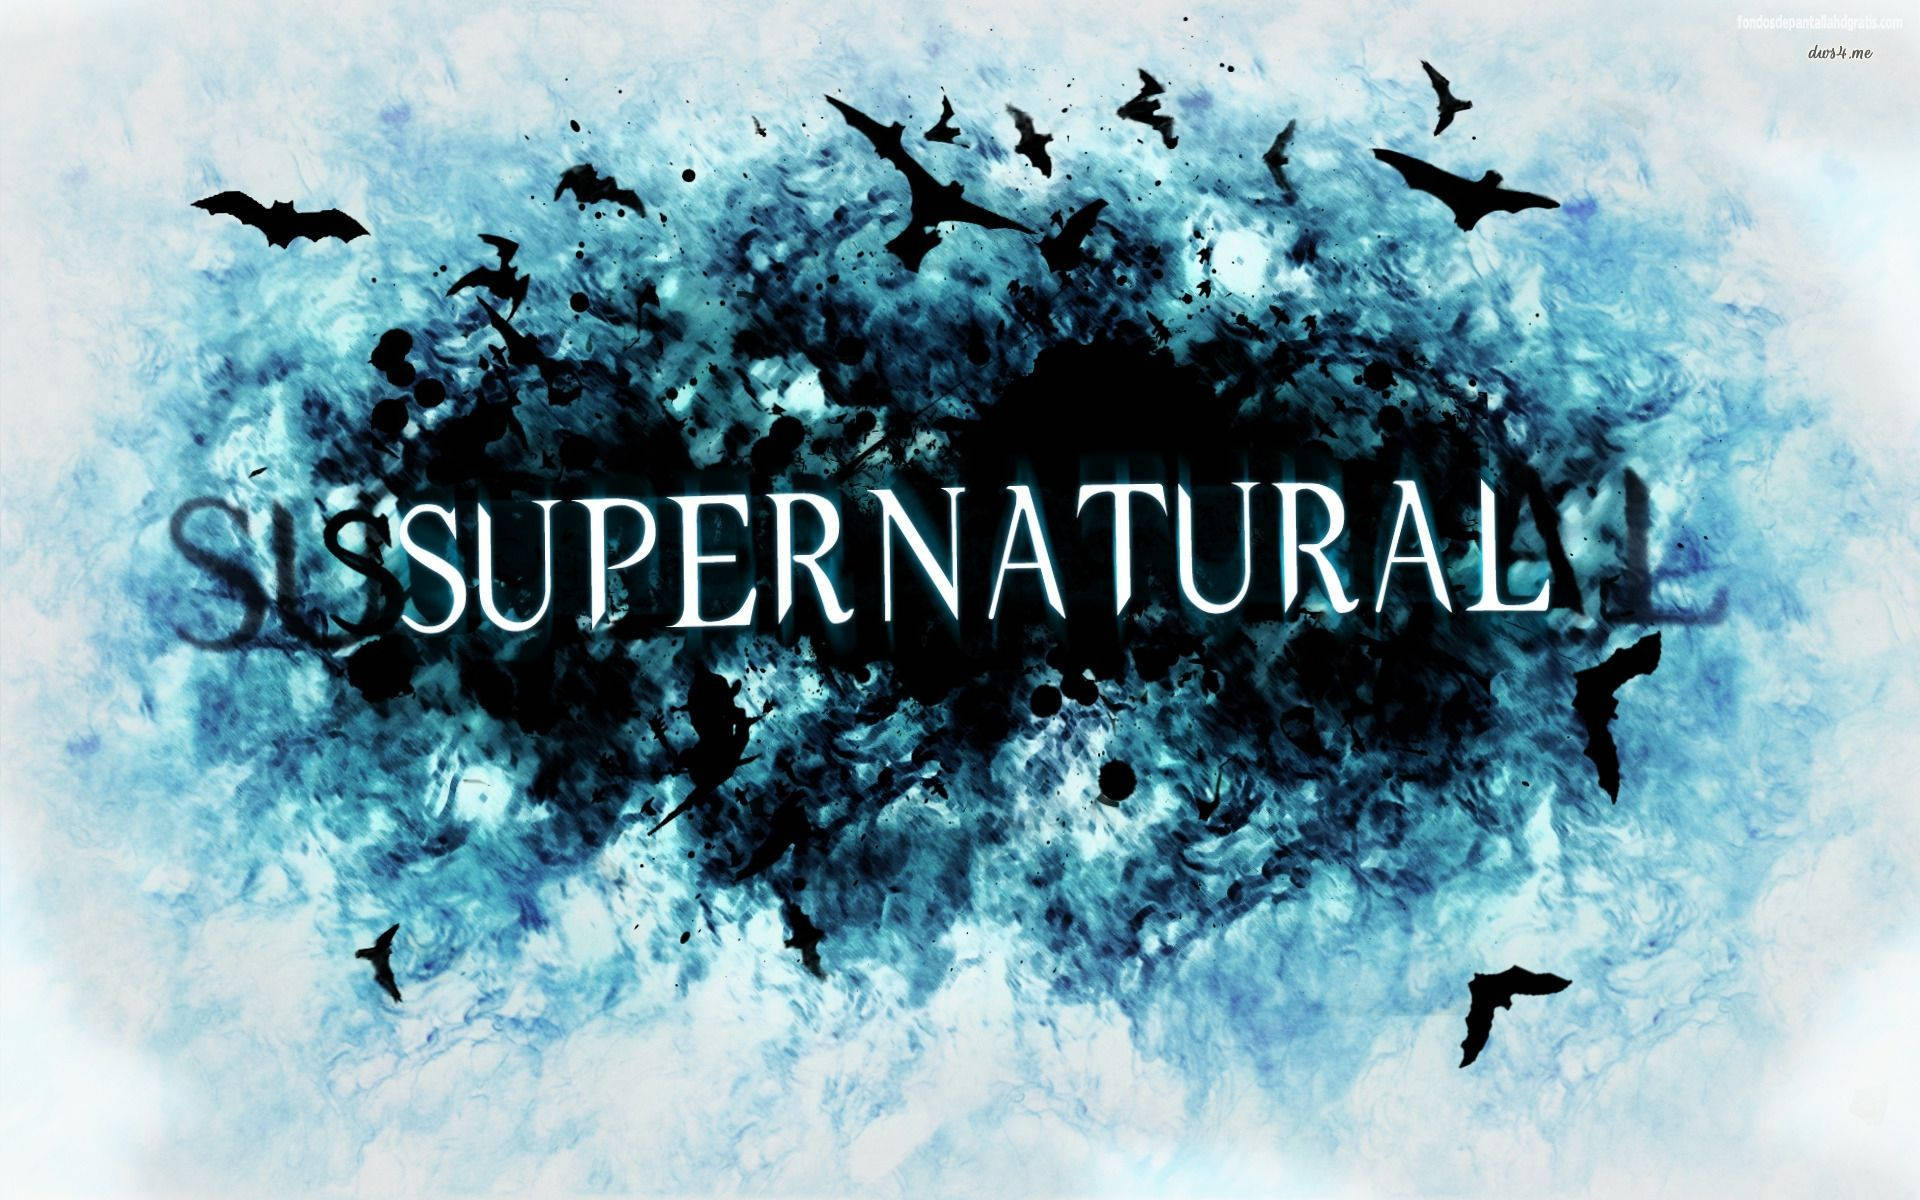 Sam and Dean Winchester defeating evil together. Wallpaper